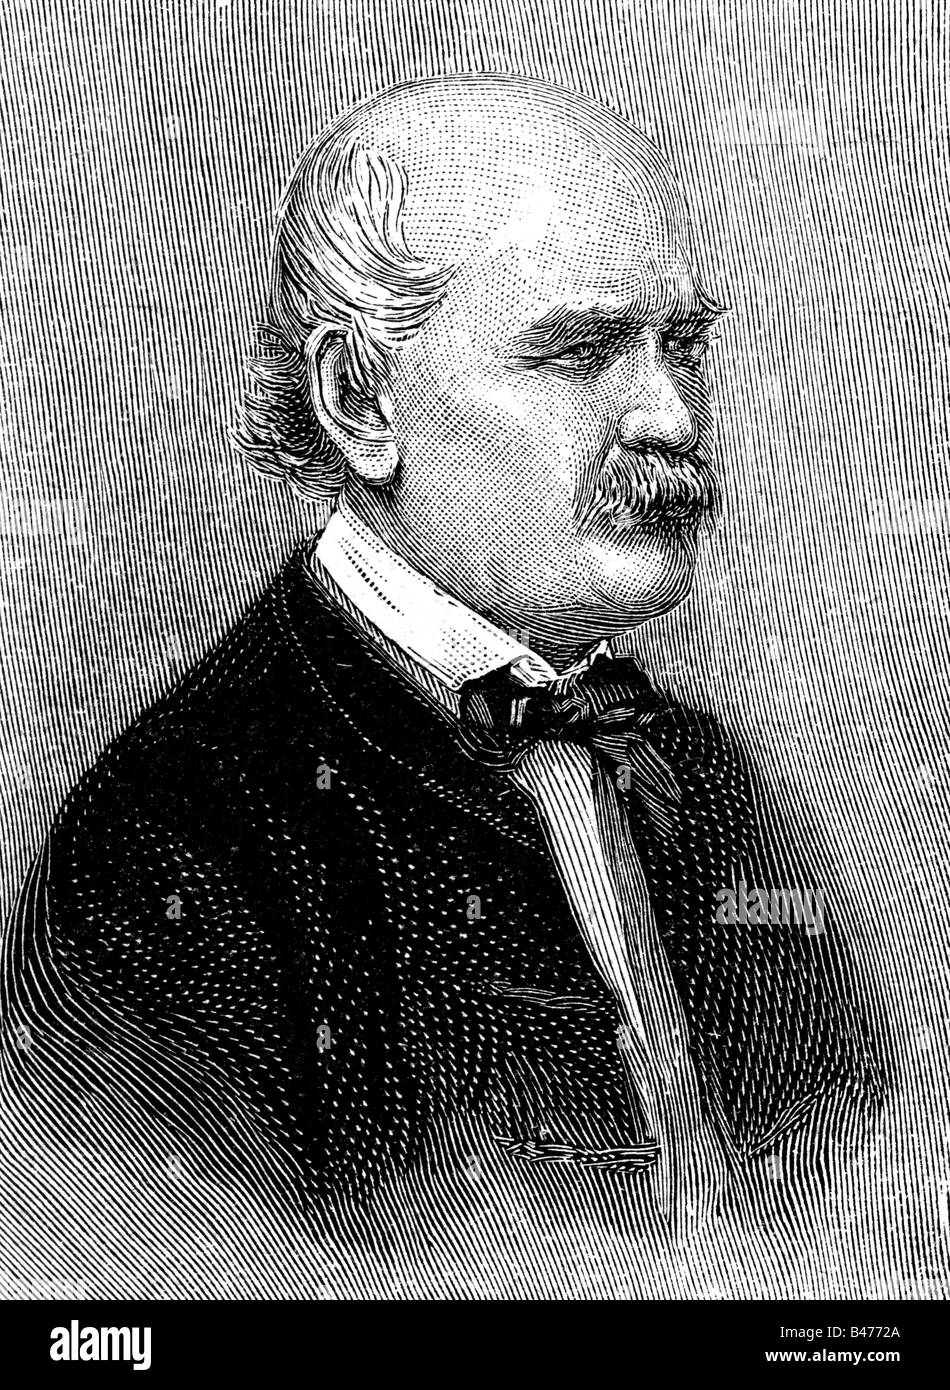 Semmelweis, Ignaz, 1.7.1818 - 13.8.1865, Austrian physician, portrait, etching by Eugen Doby (1834 - 1907), 19th century, , Stock Photo